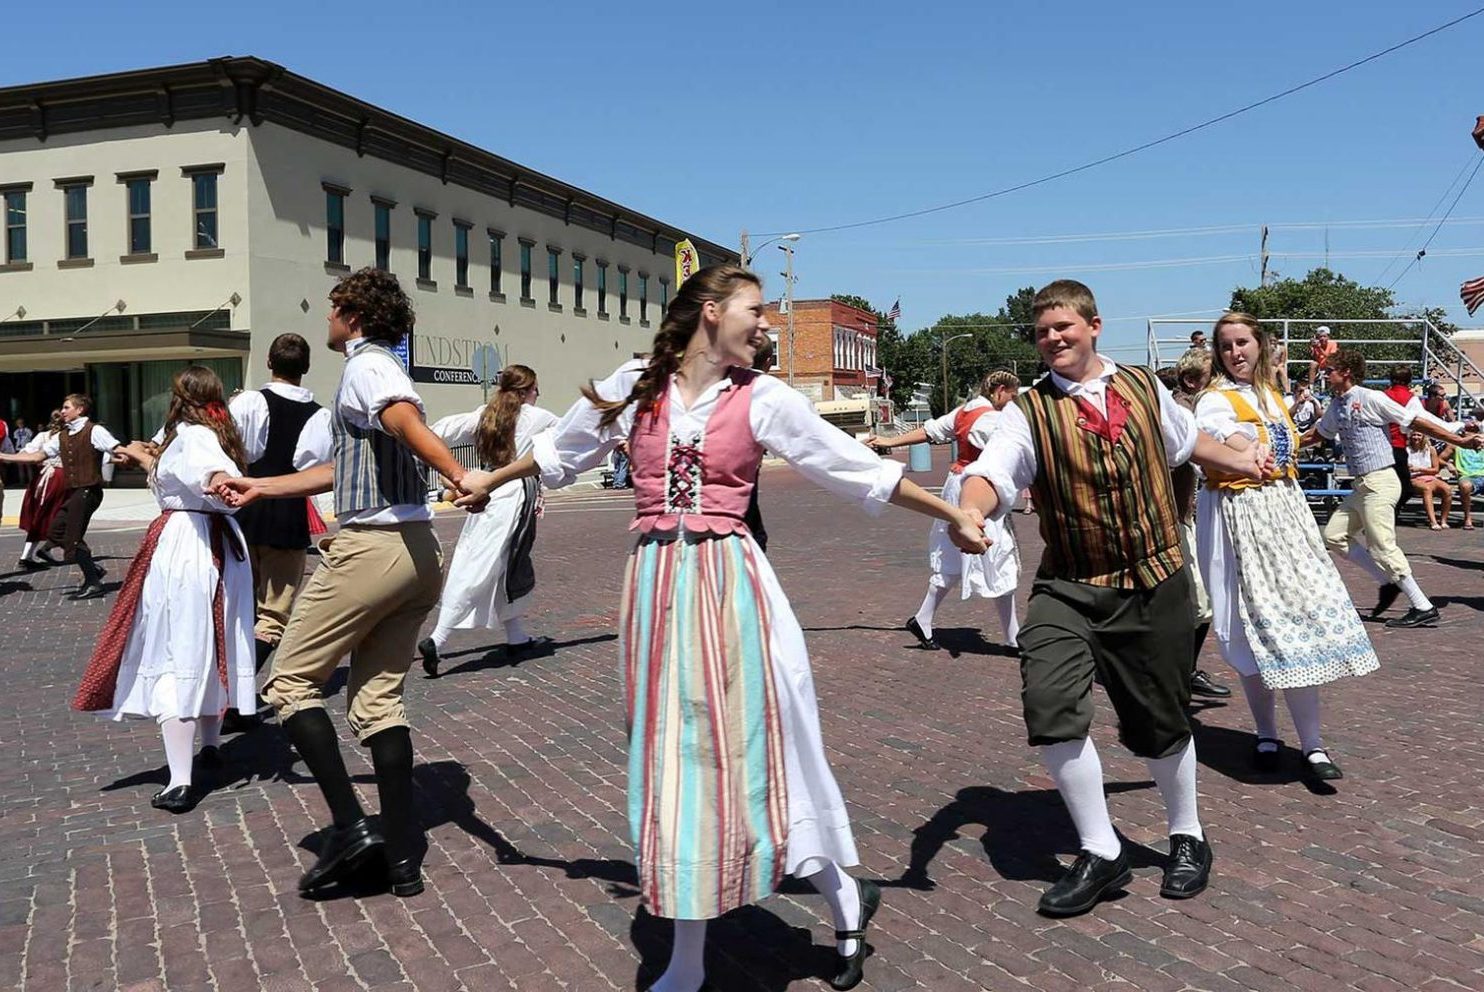 <p><strong>Best for:</strong> Traditional Swedish celebrations</p> <p>Known as "Little Sweden," this town incorporates its Swedish heritage into its brightly colored architecture, Swedish horse sculptures called <em>dalas</em>—and of course, its Christmas celebrations. The St. Lucia Festival, one of the <a href="https://www.rd.com/list/winter-solstice-traditions/">fascinating winter solstice traditions around the world</a>, honors the legend of Lucia, who came to Scandinavia bearing light and food during a famine. Wearing white gowns with red sashes and crowns of lingonberry, young women parade with stjärngosse (star boys) to symbolize life during the dark winter solstice. Traditional Swedish services of Julotta (Christmas morning) and Annandag Jule (the day after Christmas), plus a Juletide concert, are also part of the Scandanavian holiday festivities.</p> <p>The candy-colored Rosberg House bed and breakfast looks just like a gingerbread house. And the lush decor inside—not to mention the delectable breakfasts—are just as sweet. It's also conveniently located in the center of town in walking distance of art galleries, shops, and restaurants.</p> <p class="listicle-page__cta-button-shop"><a class="shop-btn" href="https://www.tripadvisor.com/Hotel_Review-g38856-d12483340-Reviews-Rosberg_House_B_B-Lindsborg_Kansas.html">Book Now</a></p>